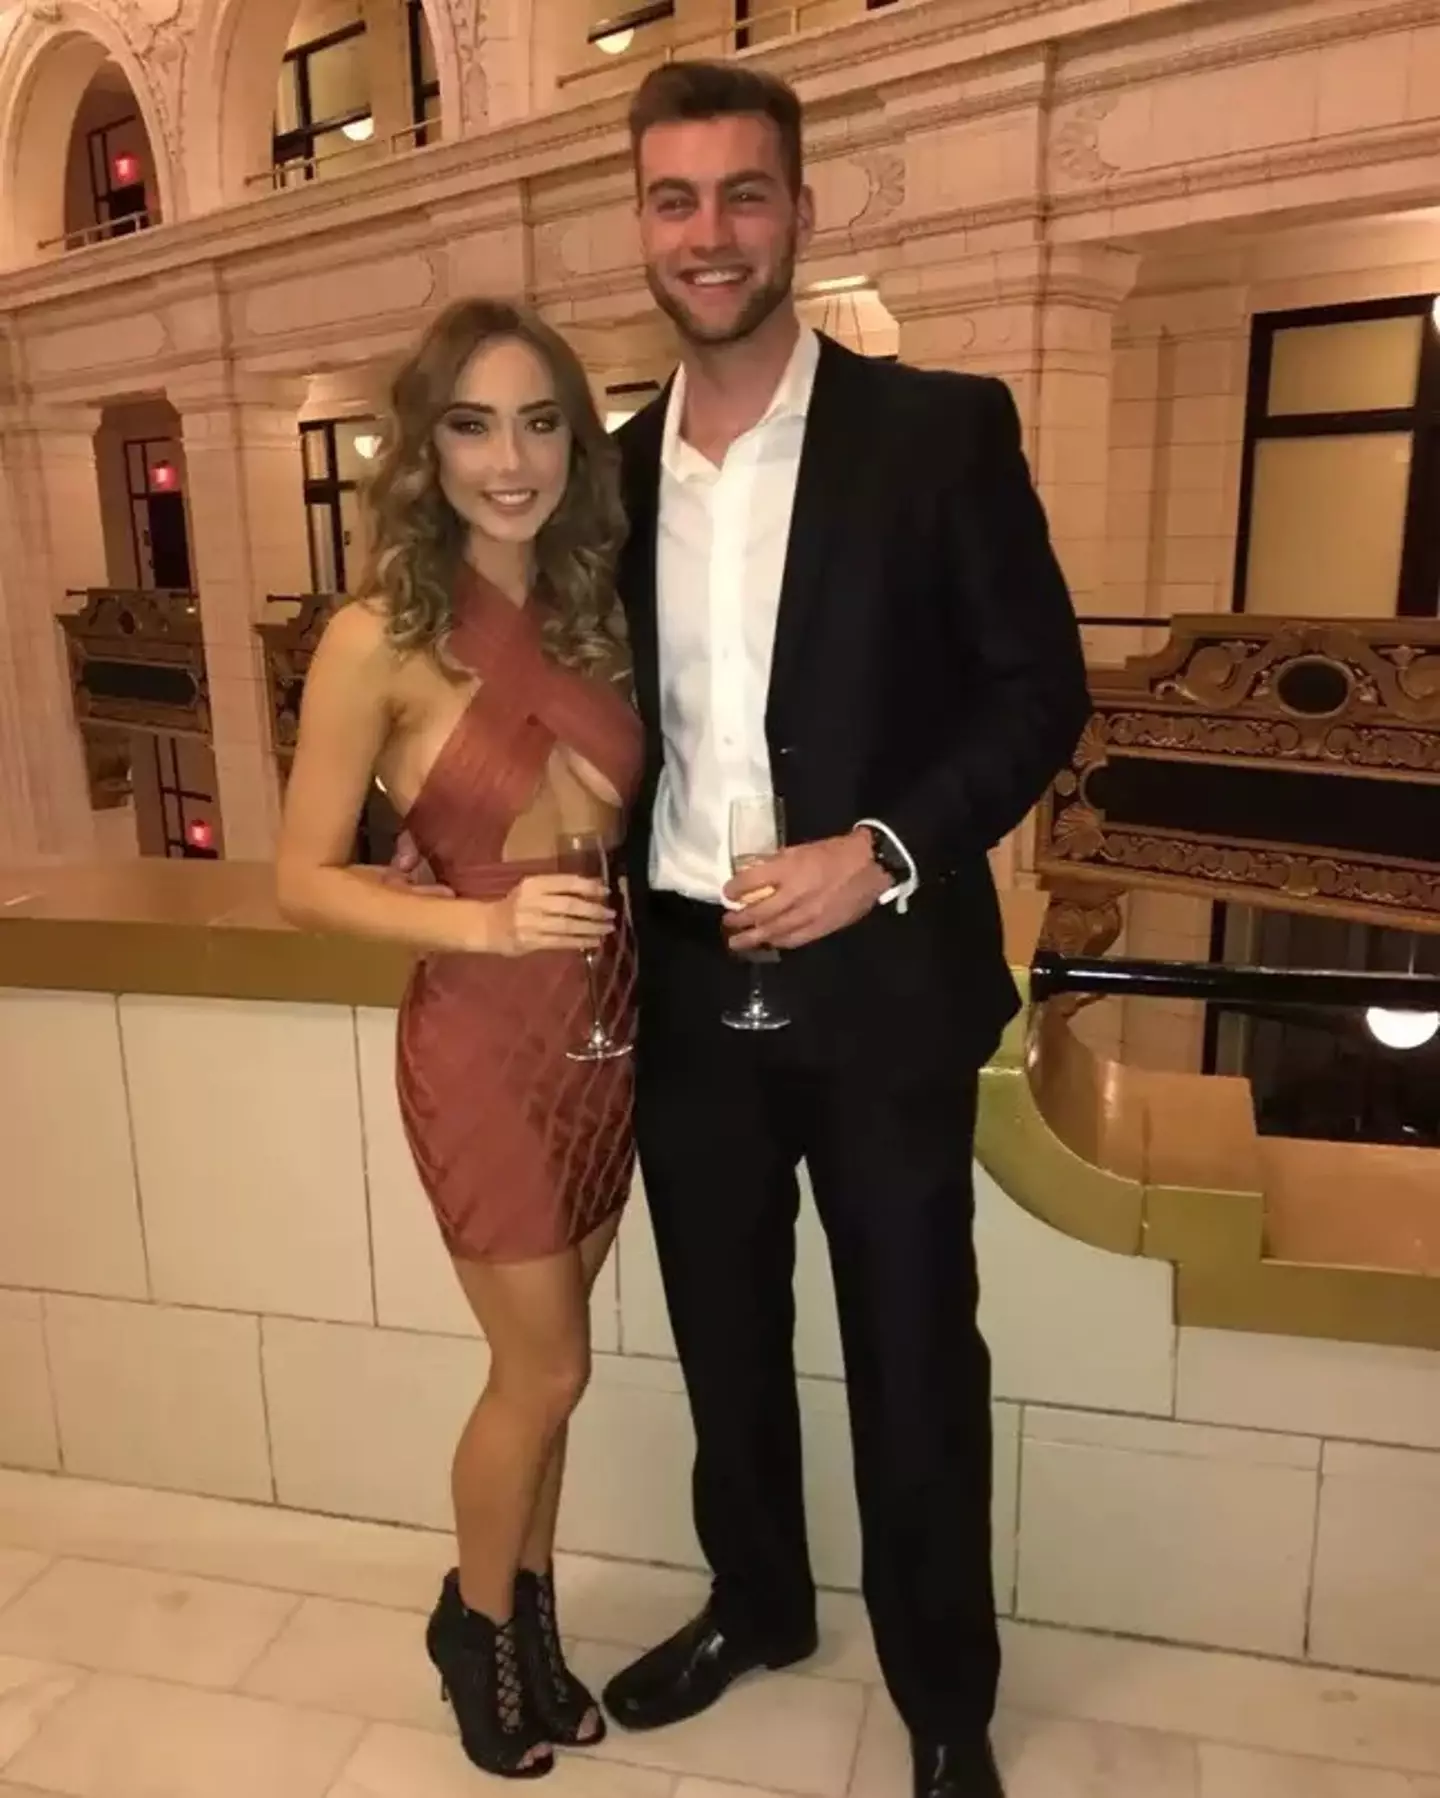 Hailie, 27, announced her own engagement earlier this year.